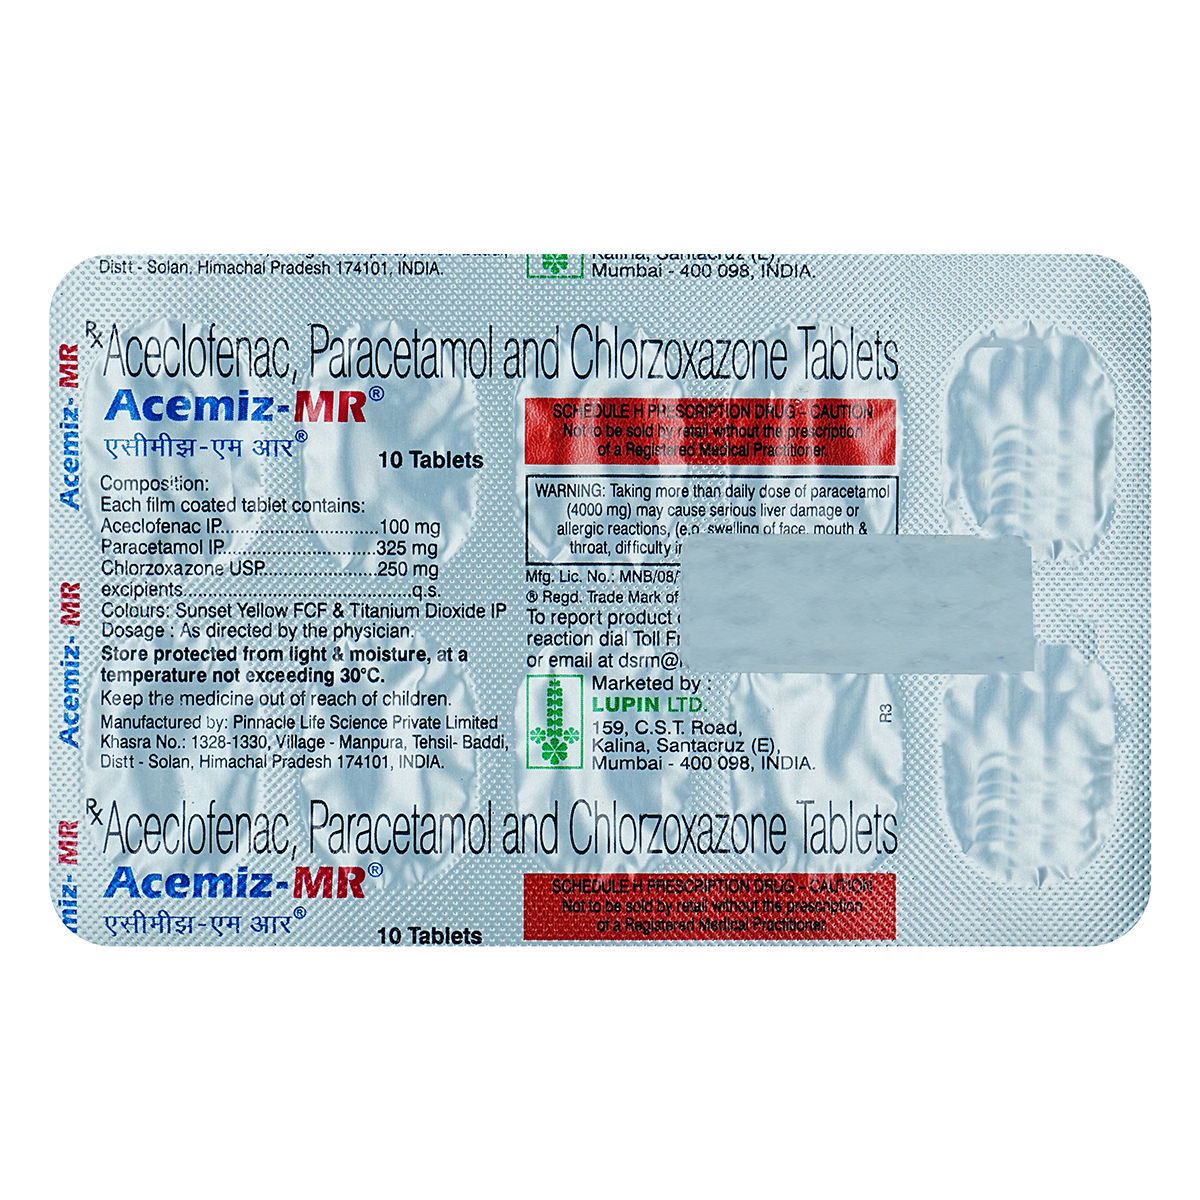 Acemiz-MR Tablet | Uses, Side Effects, Price | Apollo Pharmacy